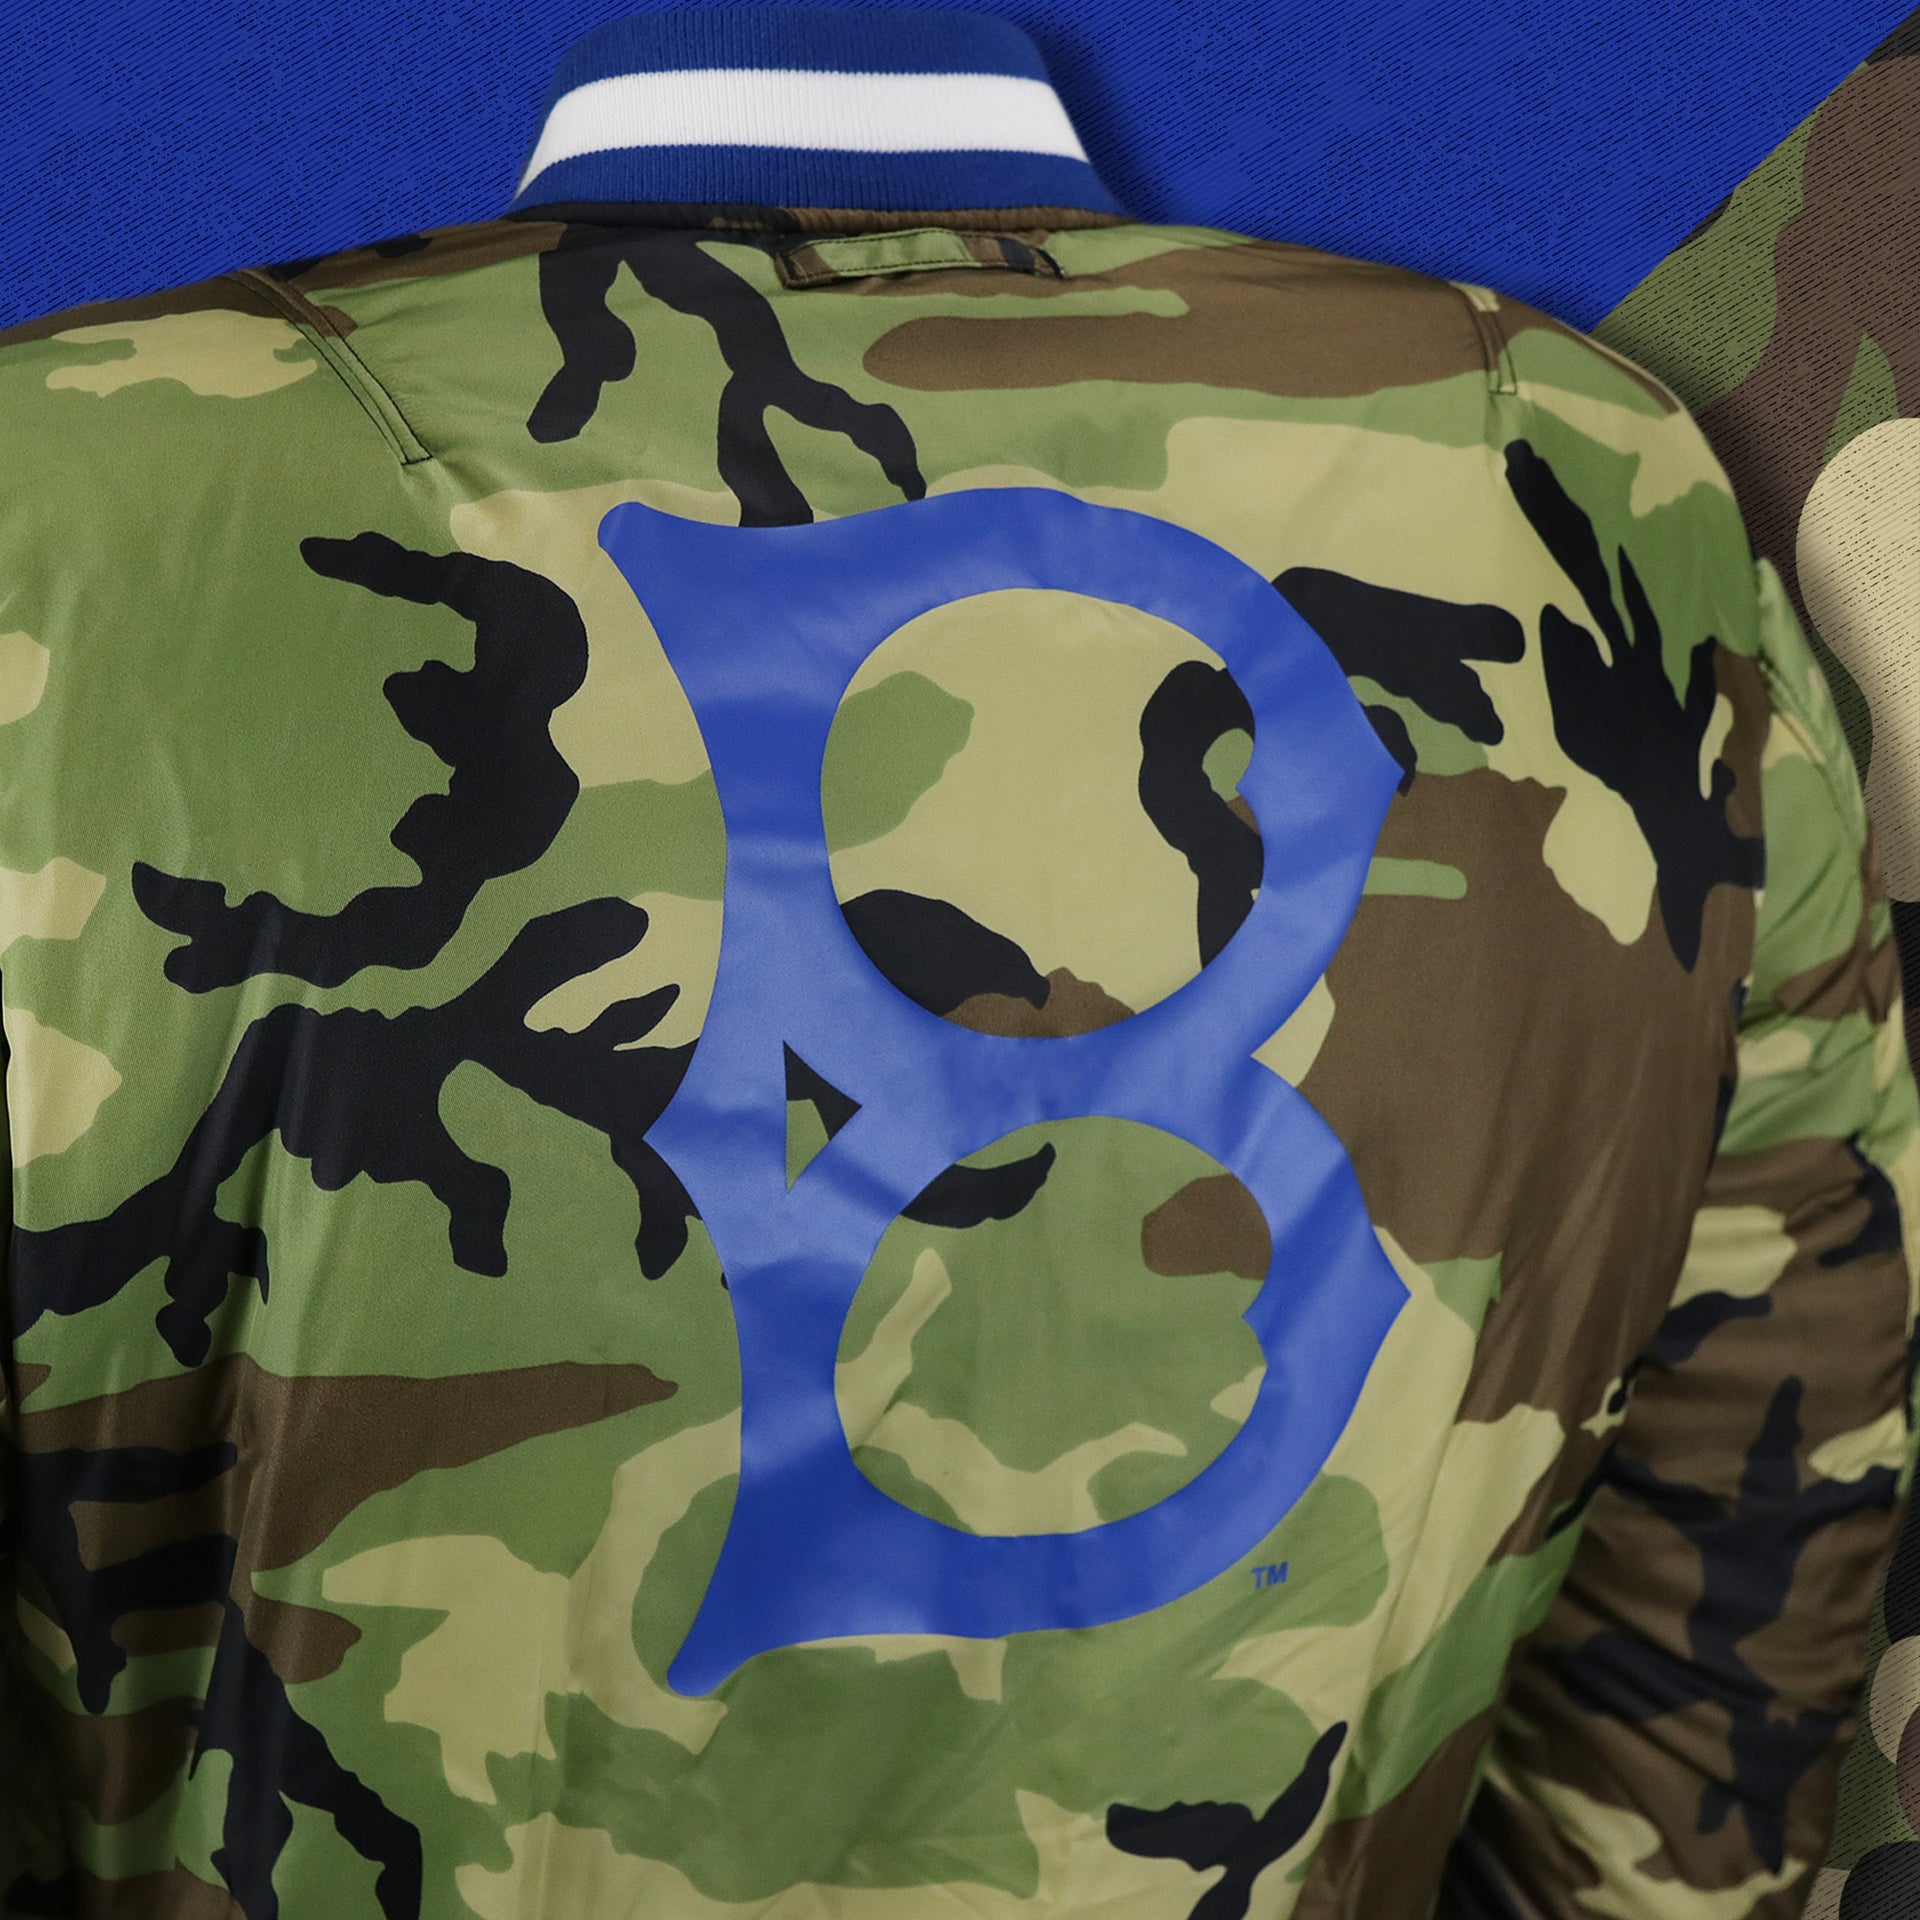 The Brooklyn Dodgers Logo Printed in Blue on the Cooperstown Brooklyn Dodgers MLB Patch Alpha Industries Reversible Bomber Jacket With Camo Liner | Royal Blue Bomber Jacket